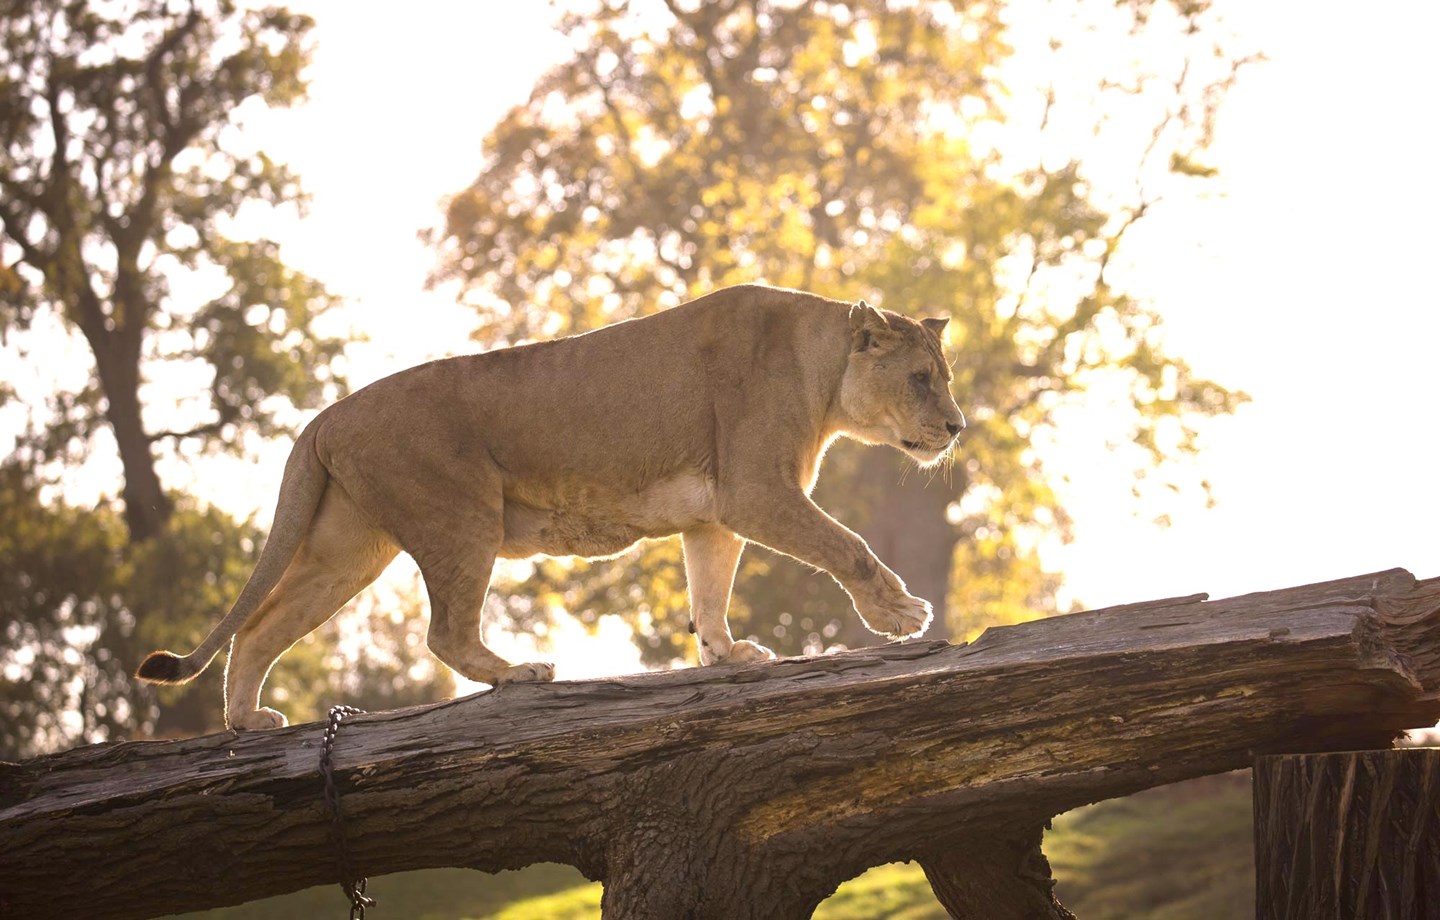 African Lion walks along log with sun in background